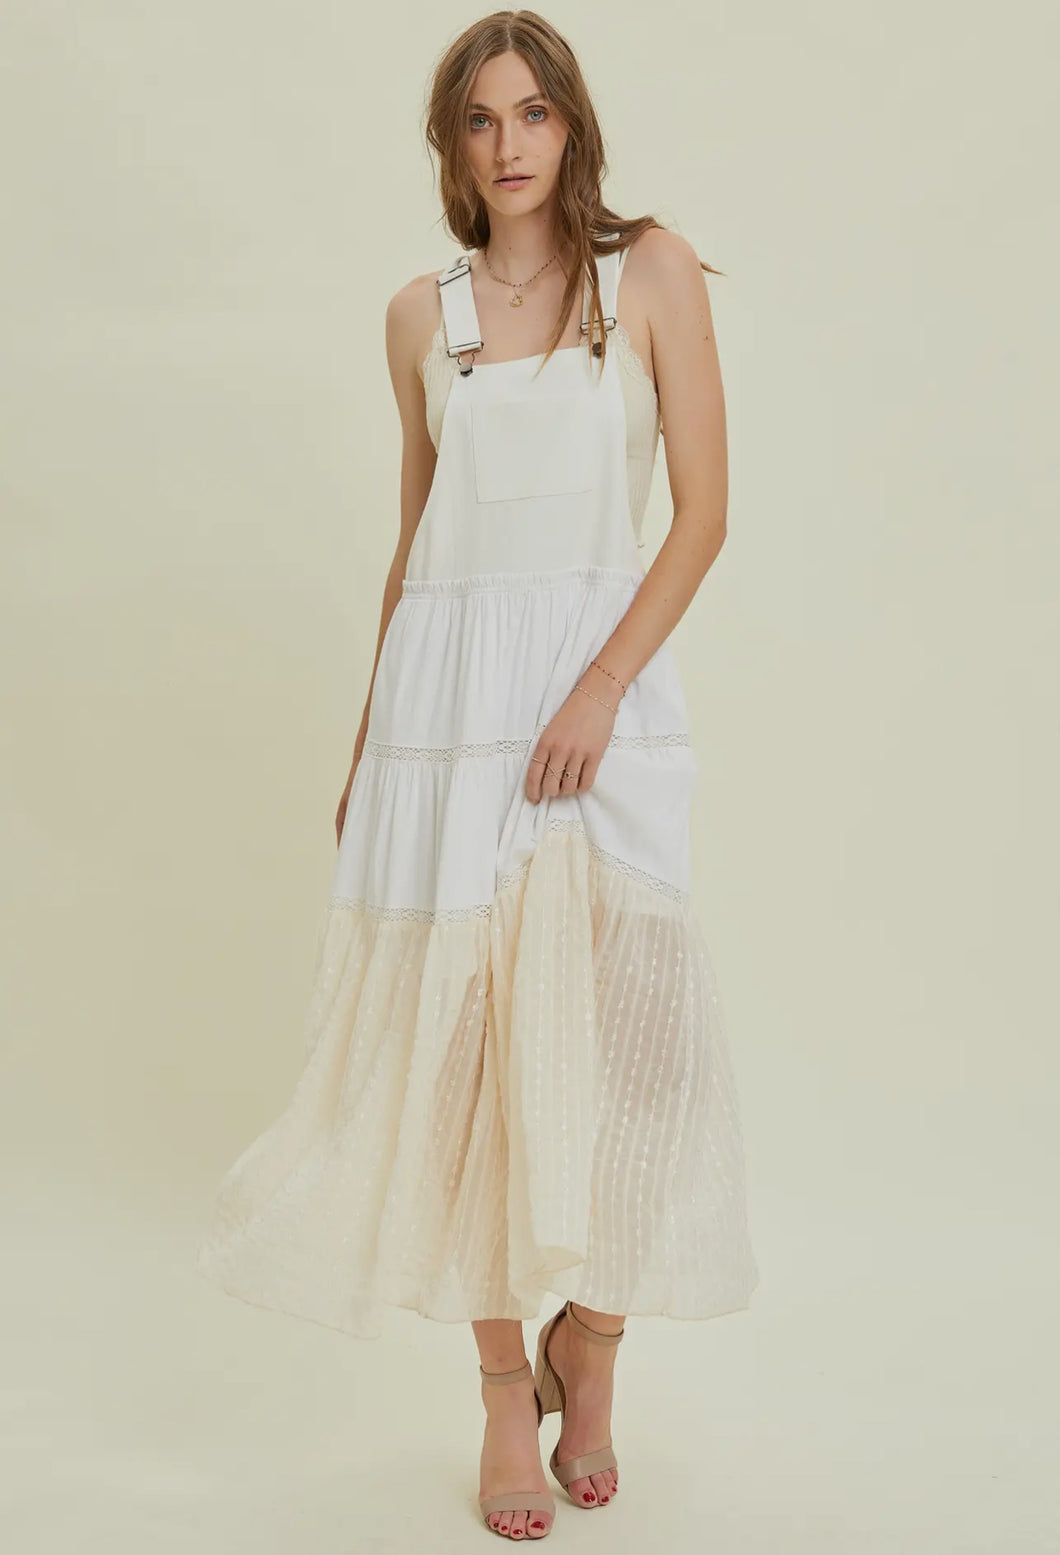 Lacey Overall Garden Dress